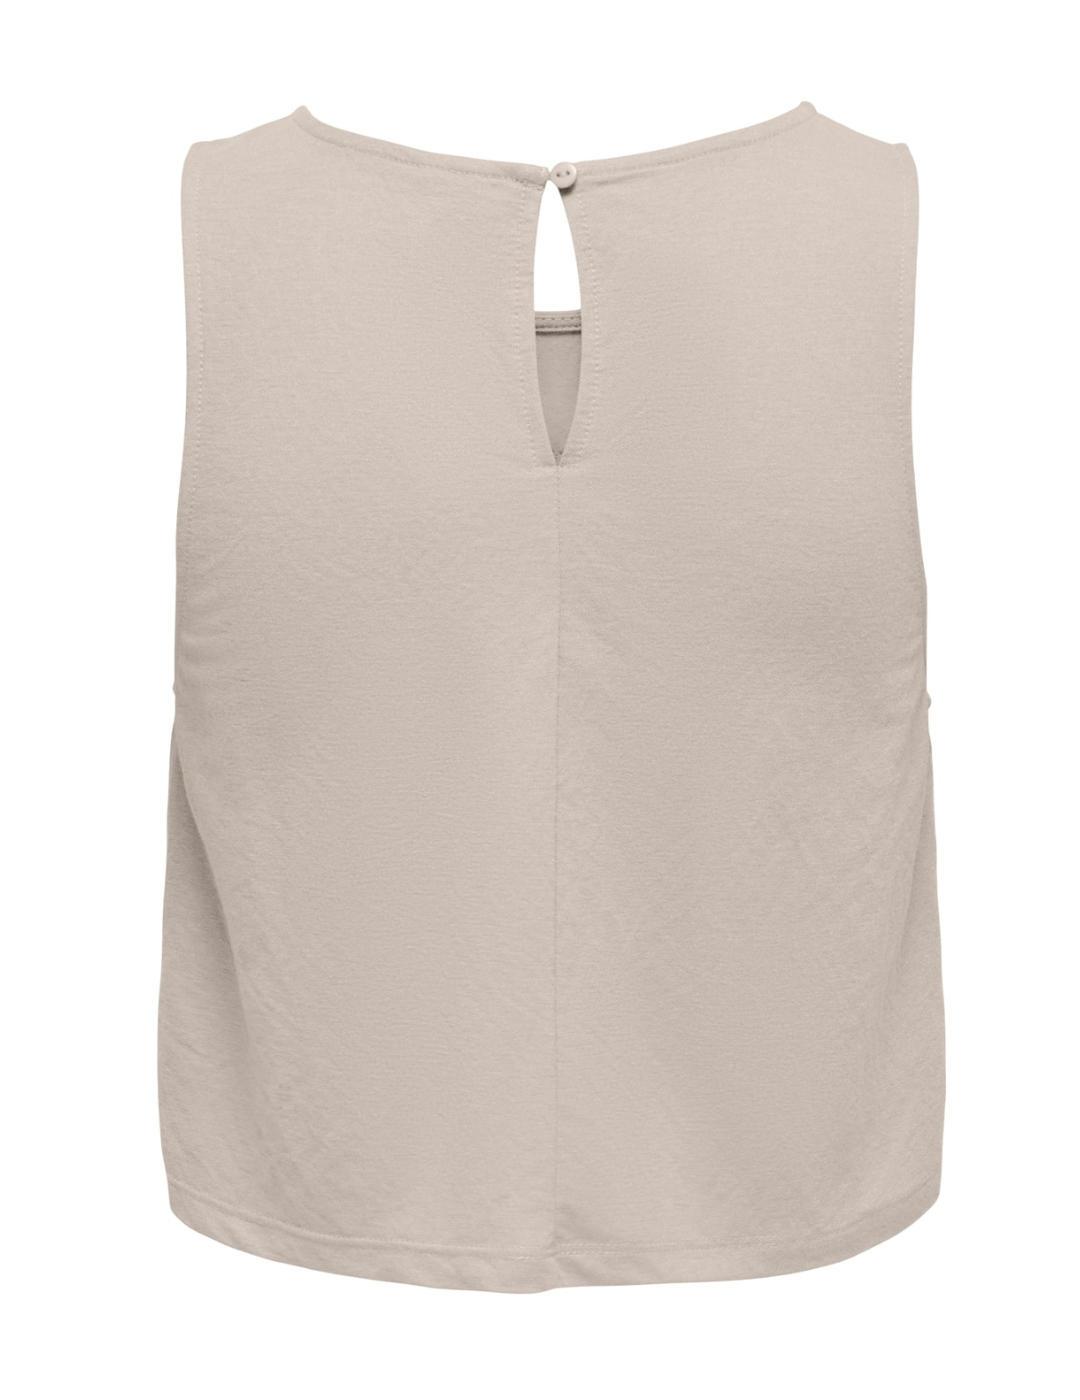 Top crop Only Jany beige tirante ancho para mujer